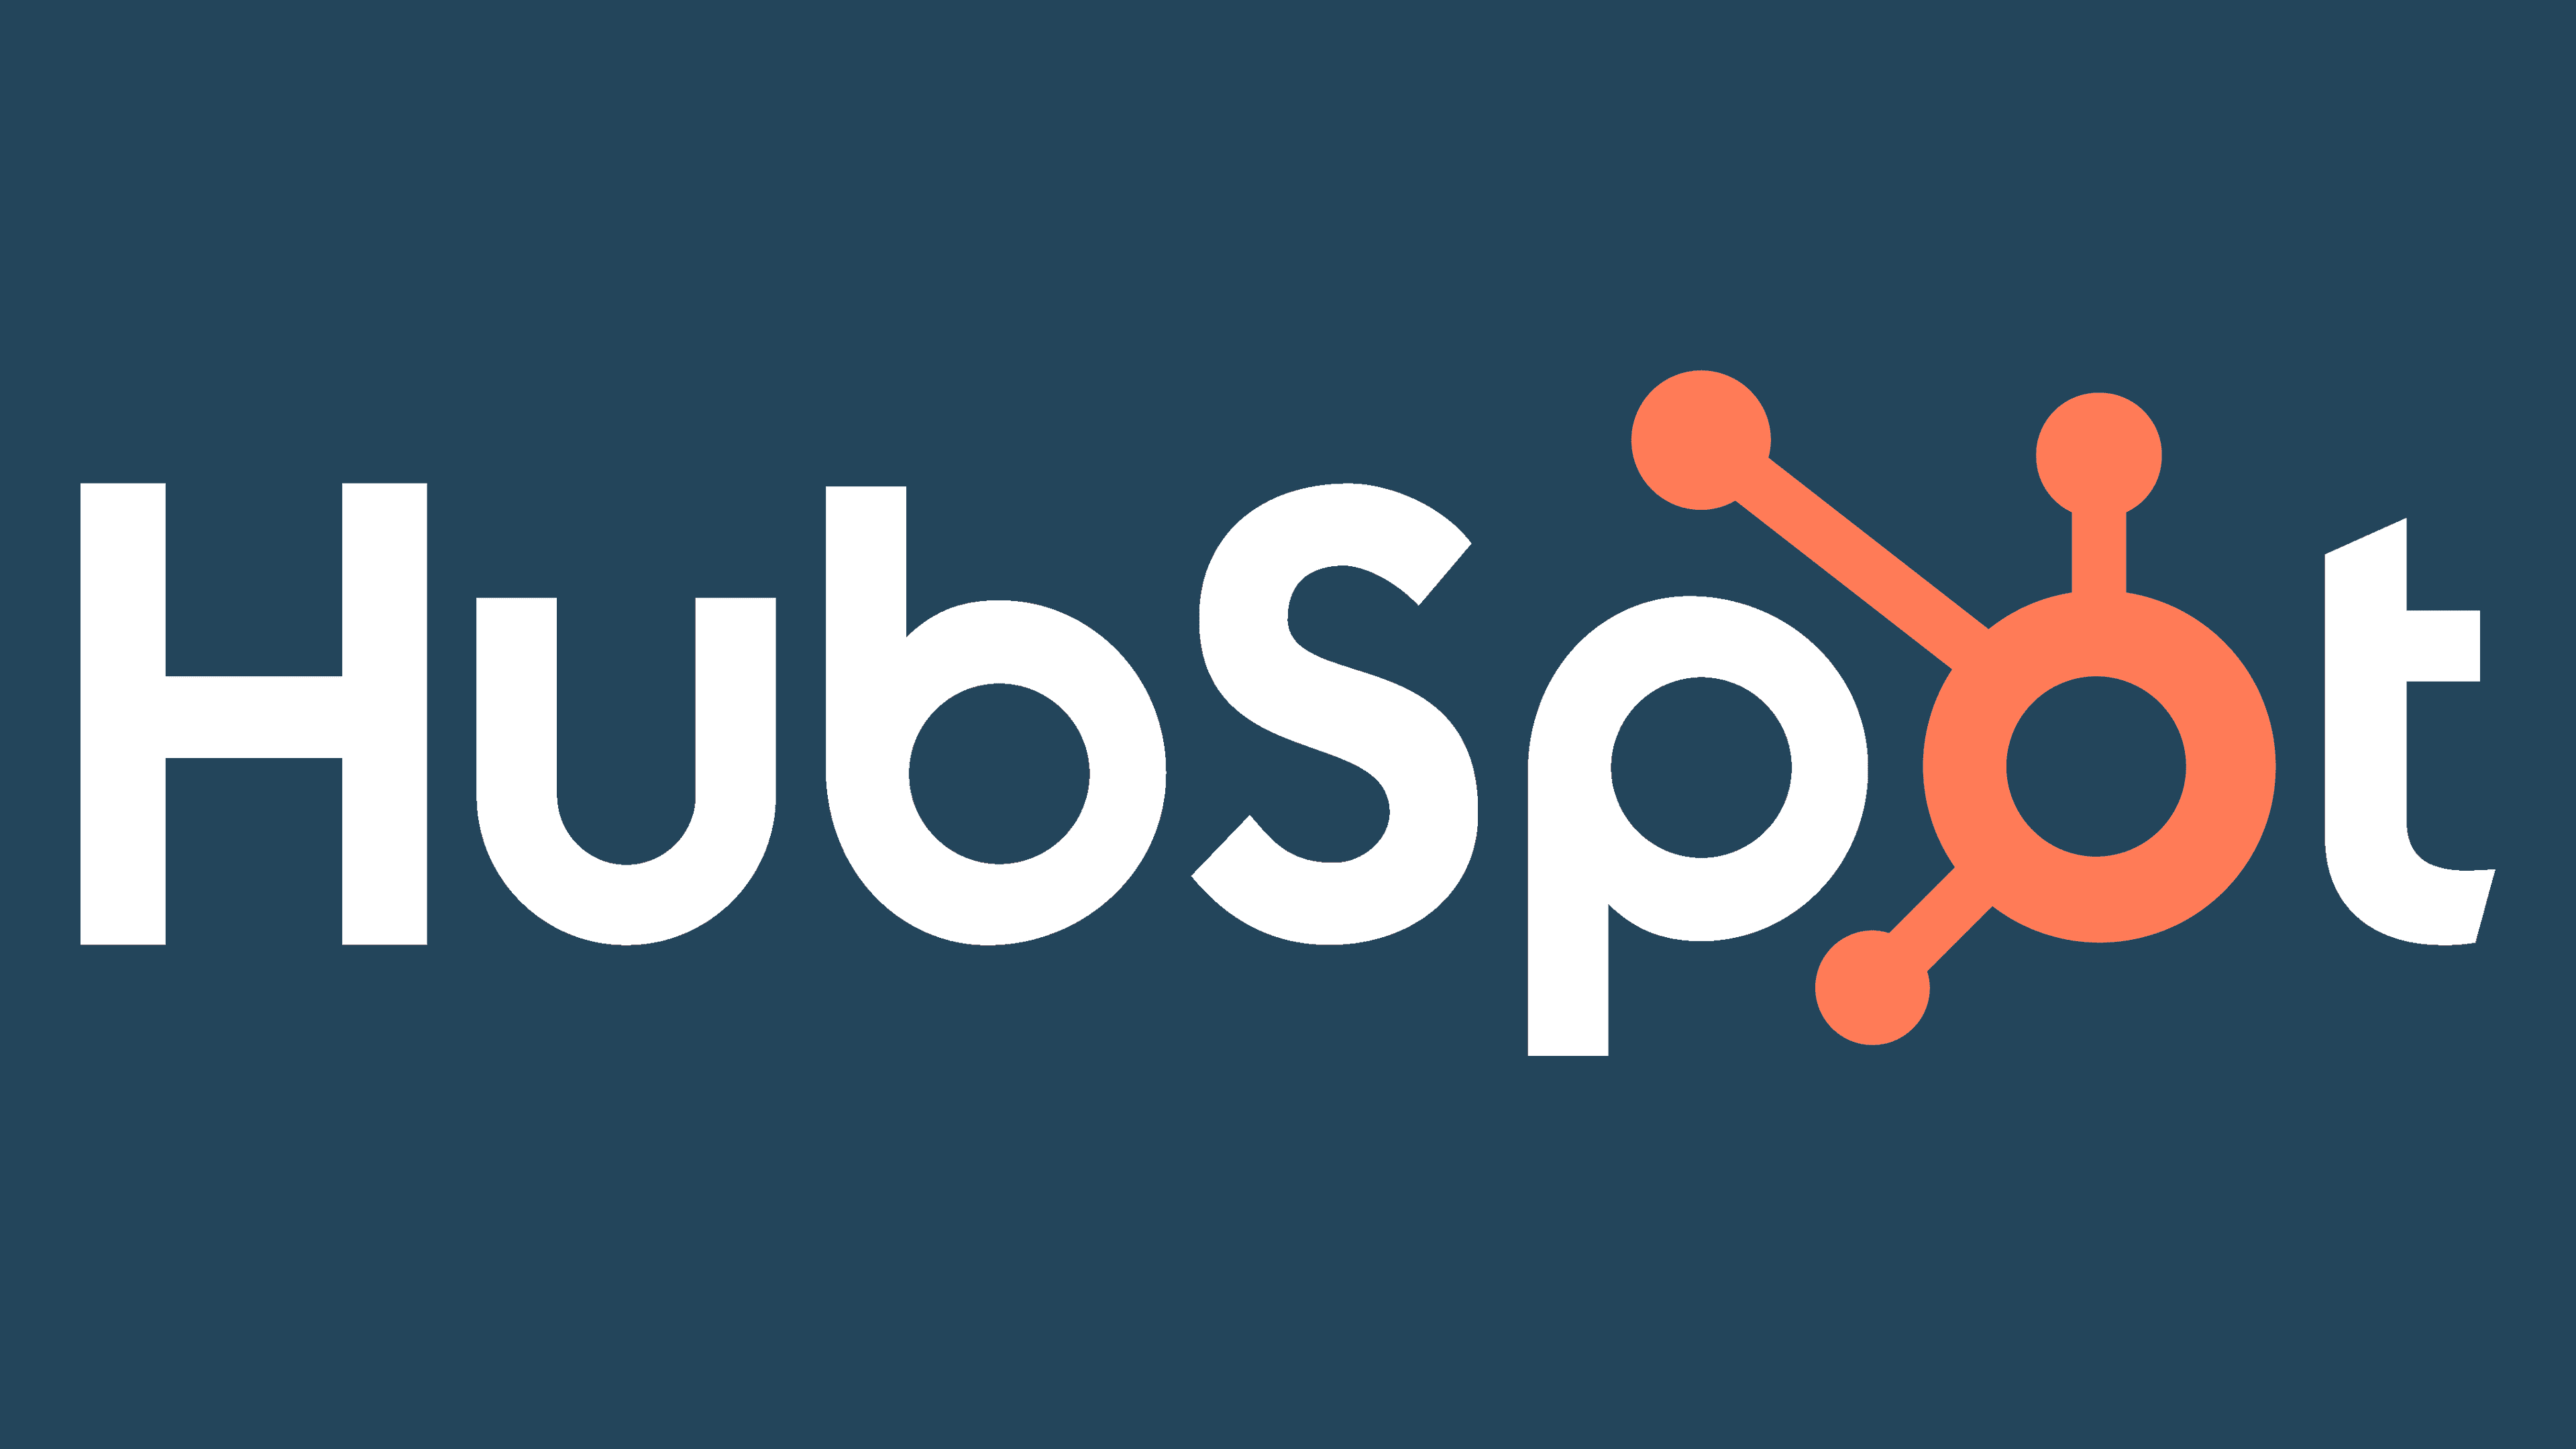 Getting started with Hubspot in 2023 - A practical, step-by-step guide to help you get going on the path to success with Hubspot.